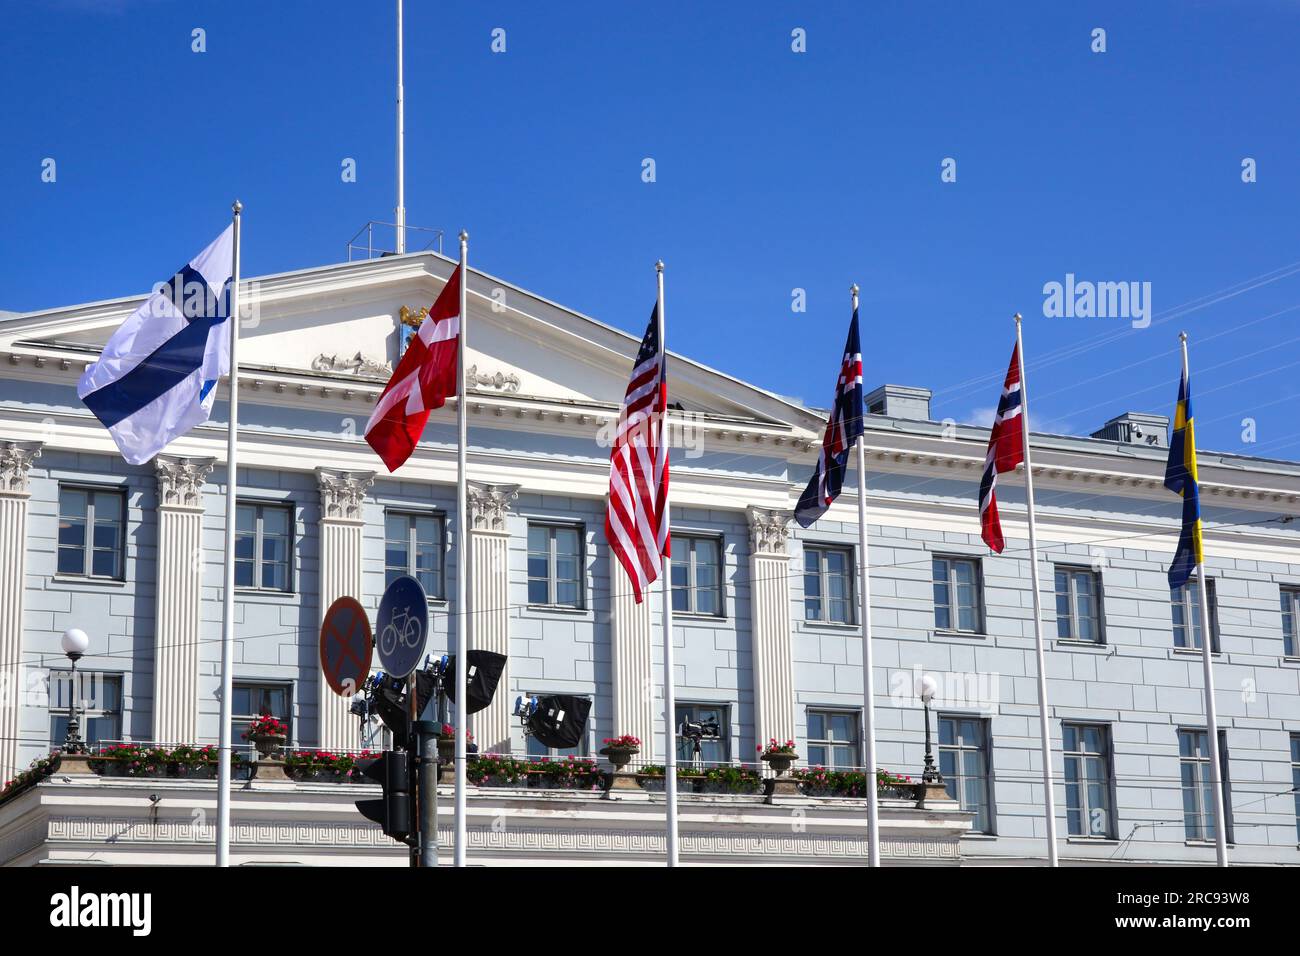 Helsinki, Finland. July 13, 2023. US and Nordic flags in front of Helsinki city hall ahead of US – Nordic Leaders´ Summit 2023. Image credit: Taina Sohlman/Alamy Stock Photo